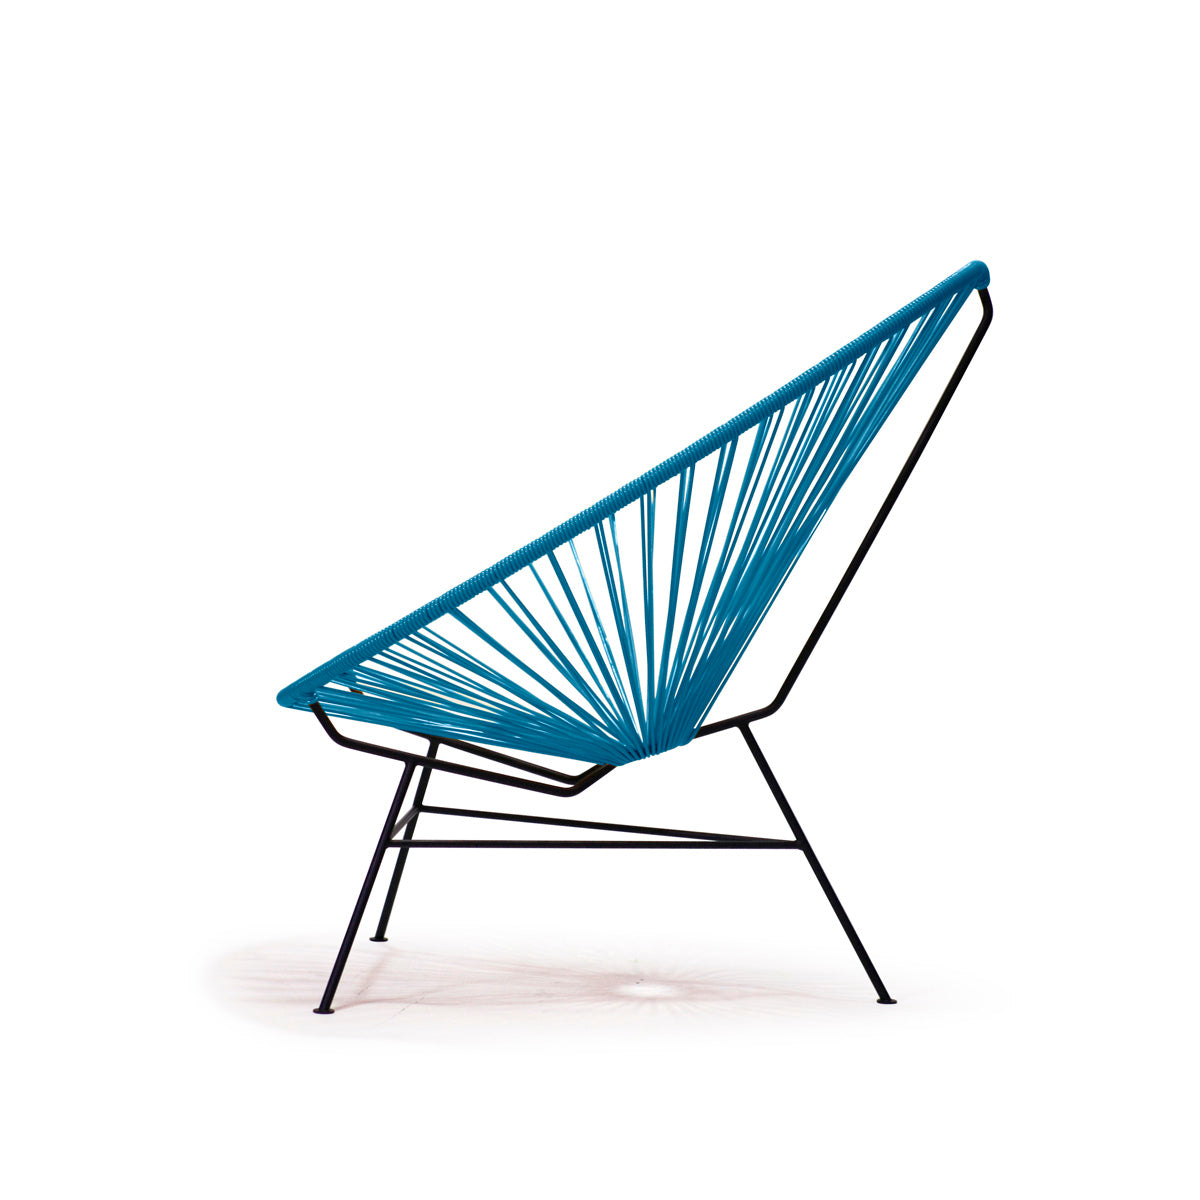 Acapulco Chair Petro Blue　アカウプルコチェア